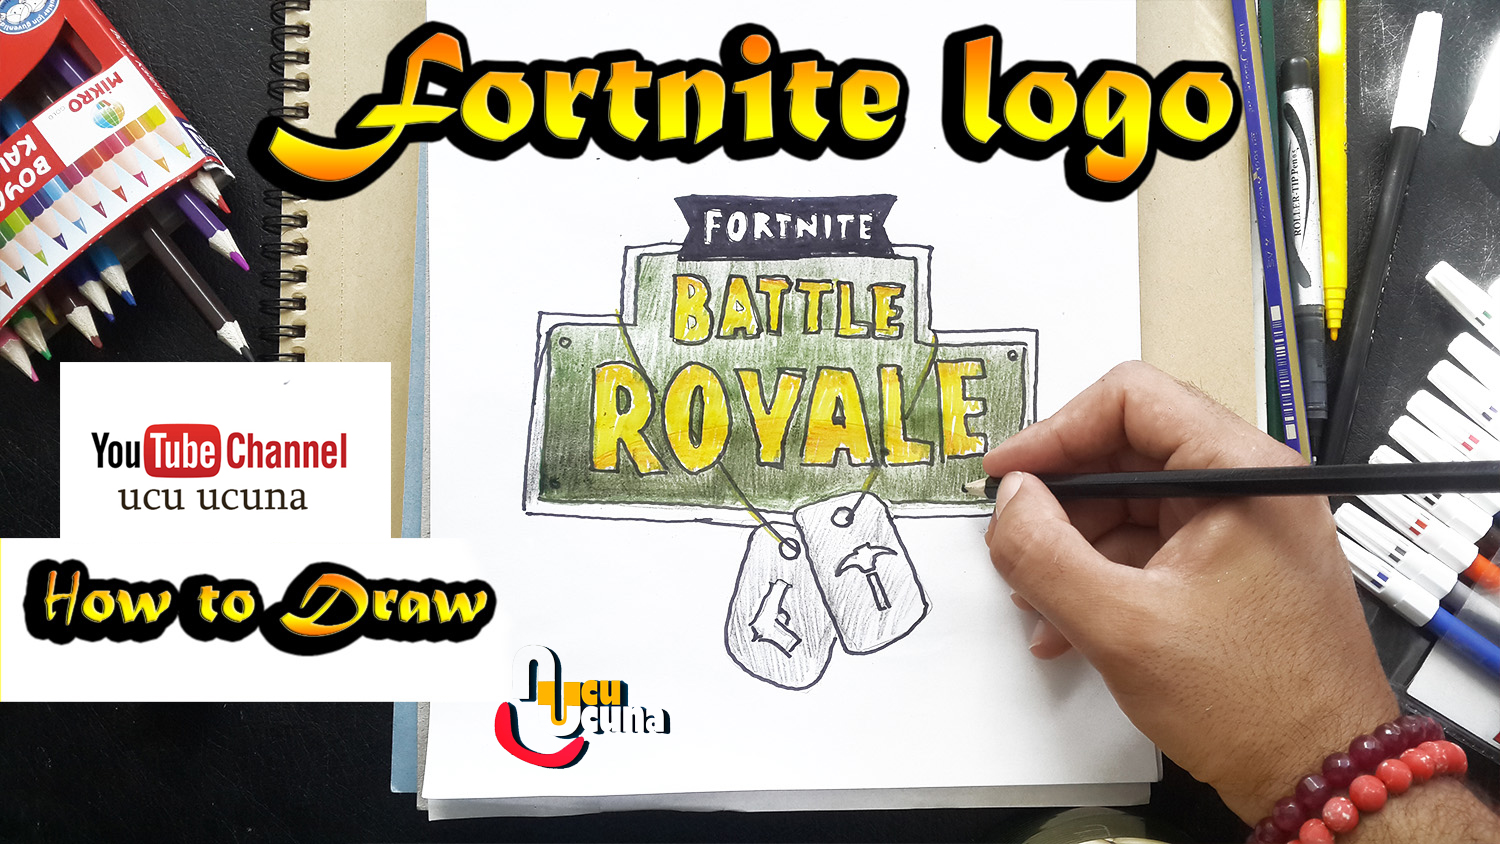 How to draw drift tutorial youtube channel name is ucu ucuna learn how to draw fortnite logo  fortnite step by step beginner drawing tutorial logo from fortnite